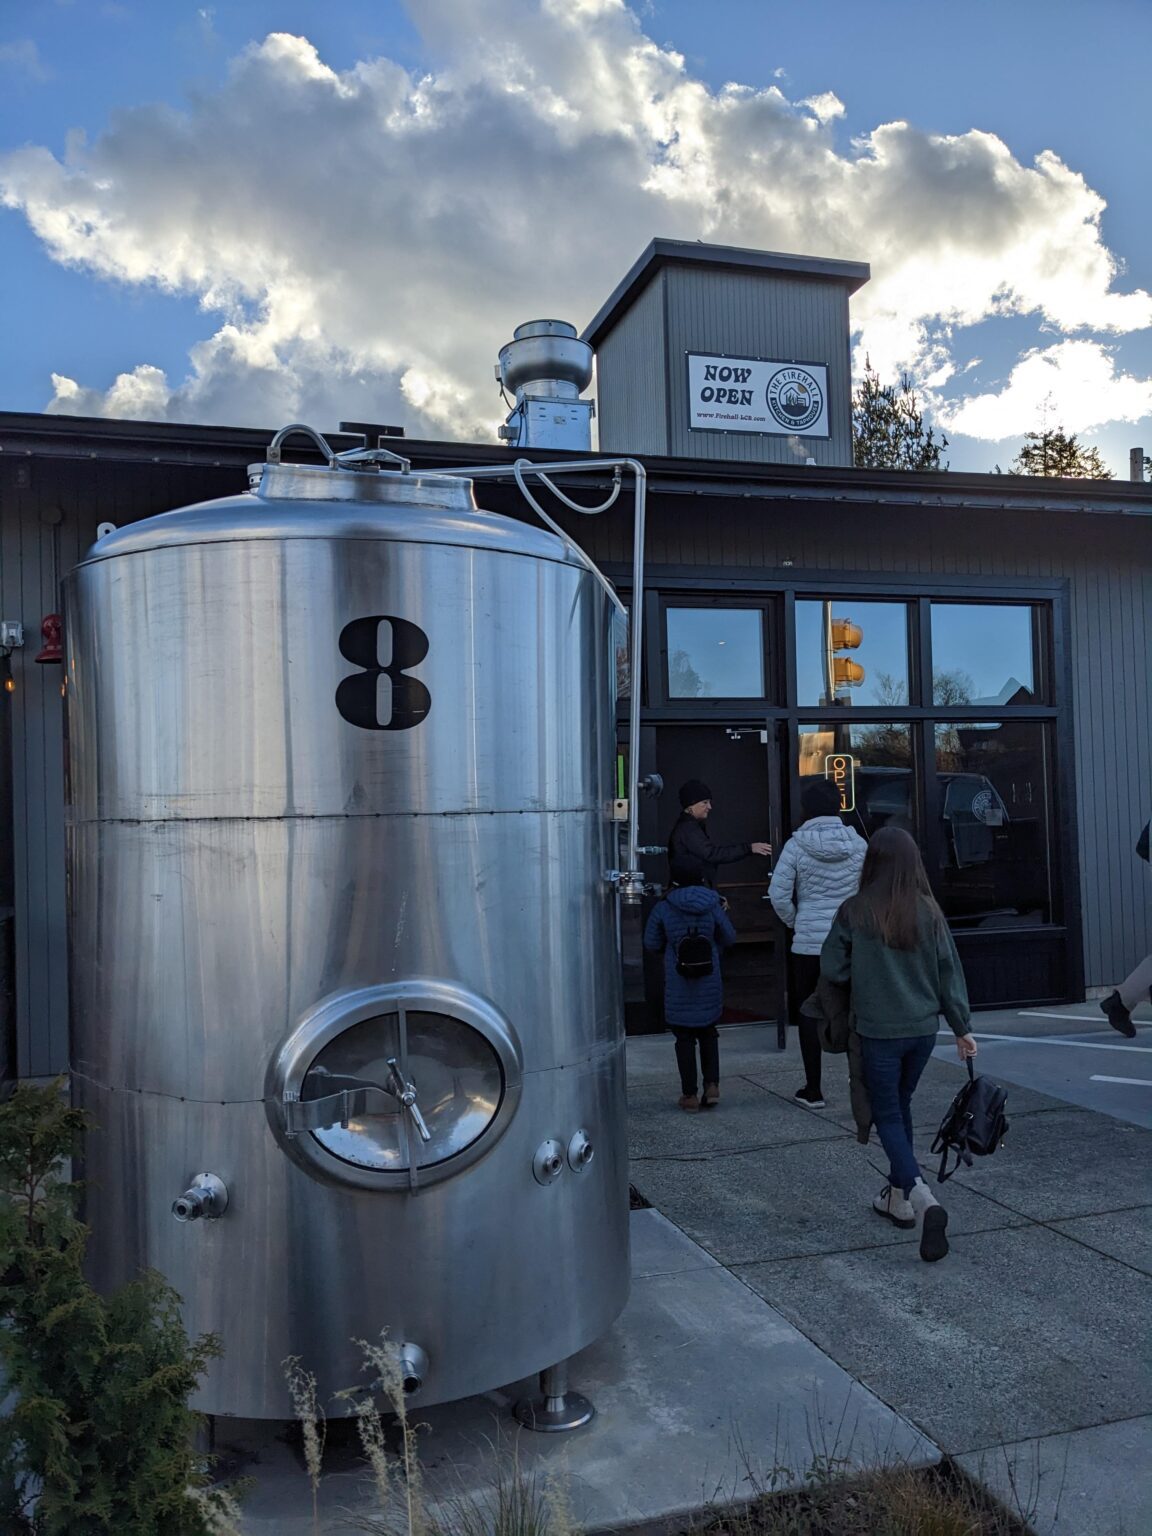 The Firehall Kitchen & Taphouse opened in La Conner in late December.  It's La Conner Brewing Co.’s second location. The space features both all-ages restaurant seating and 21+ bar seating.